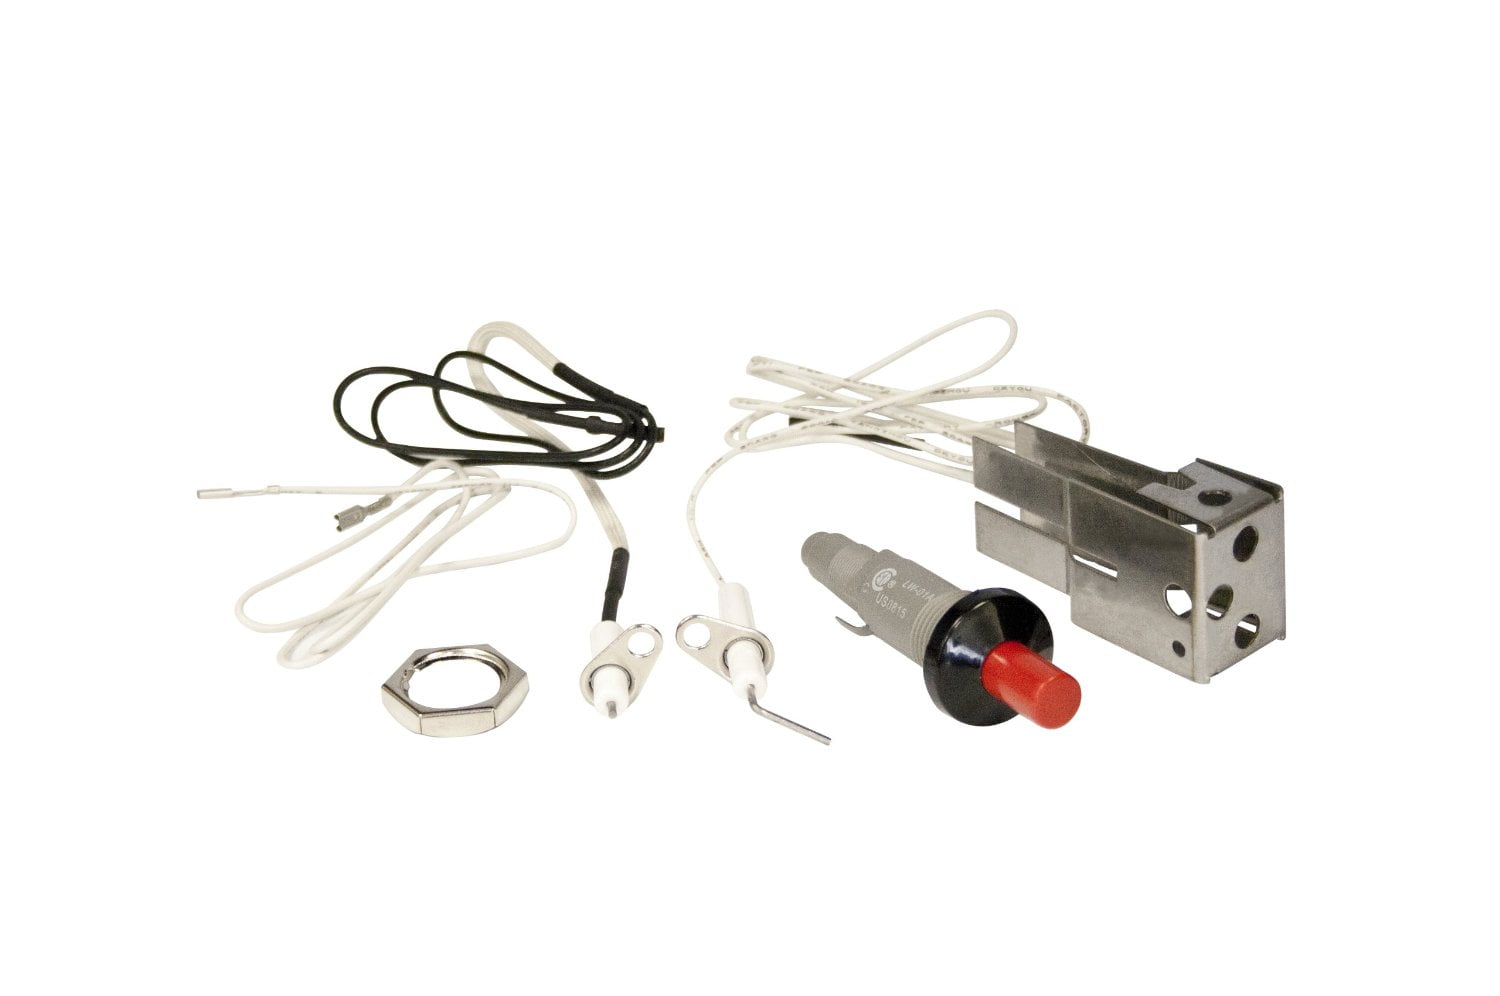 Gas Grill Push Button Spark Generator 03100 Kenmore for Charbroil 